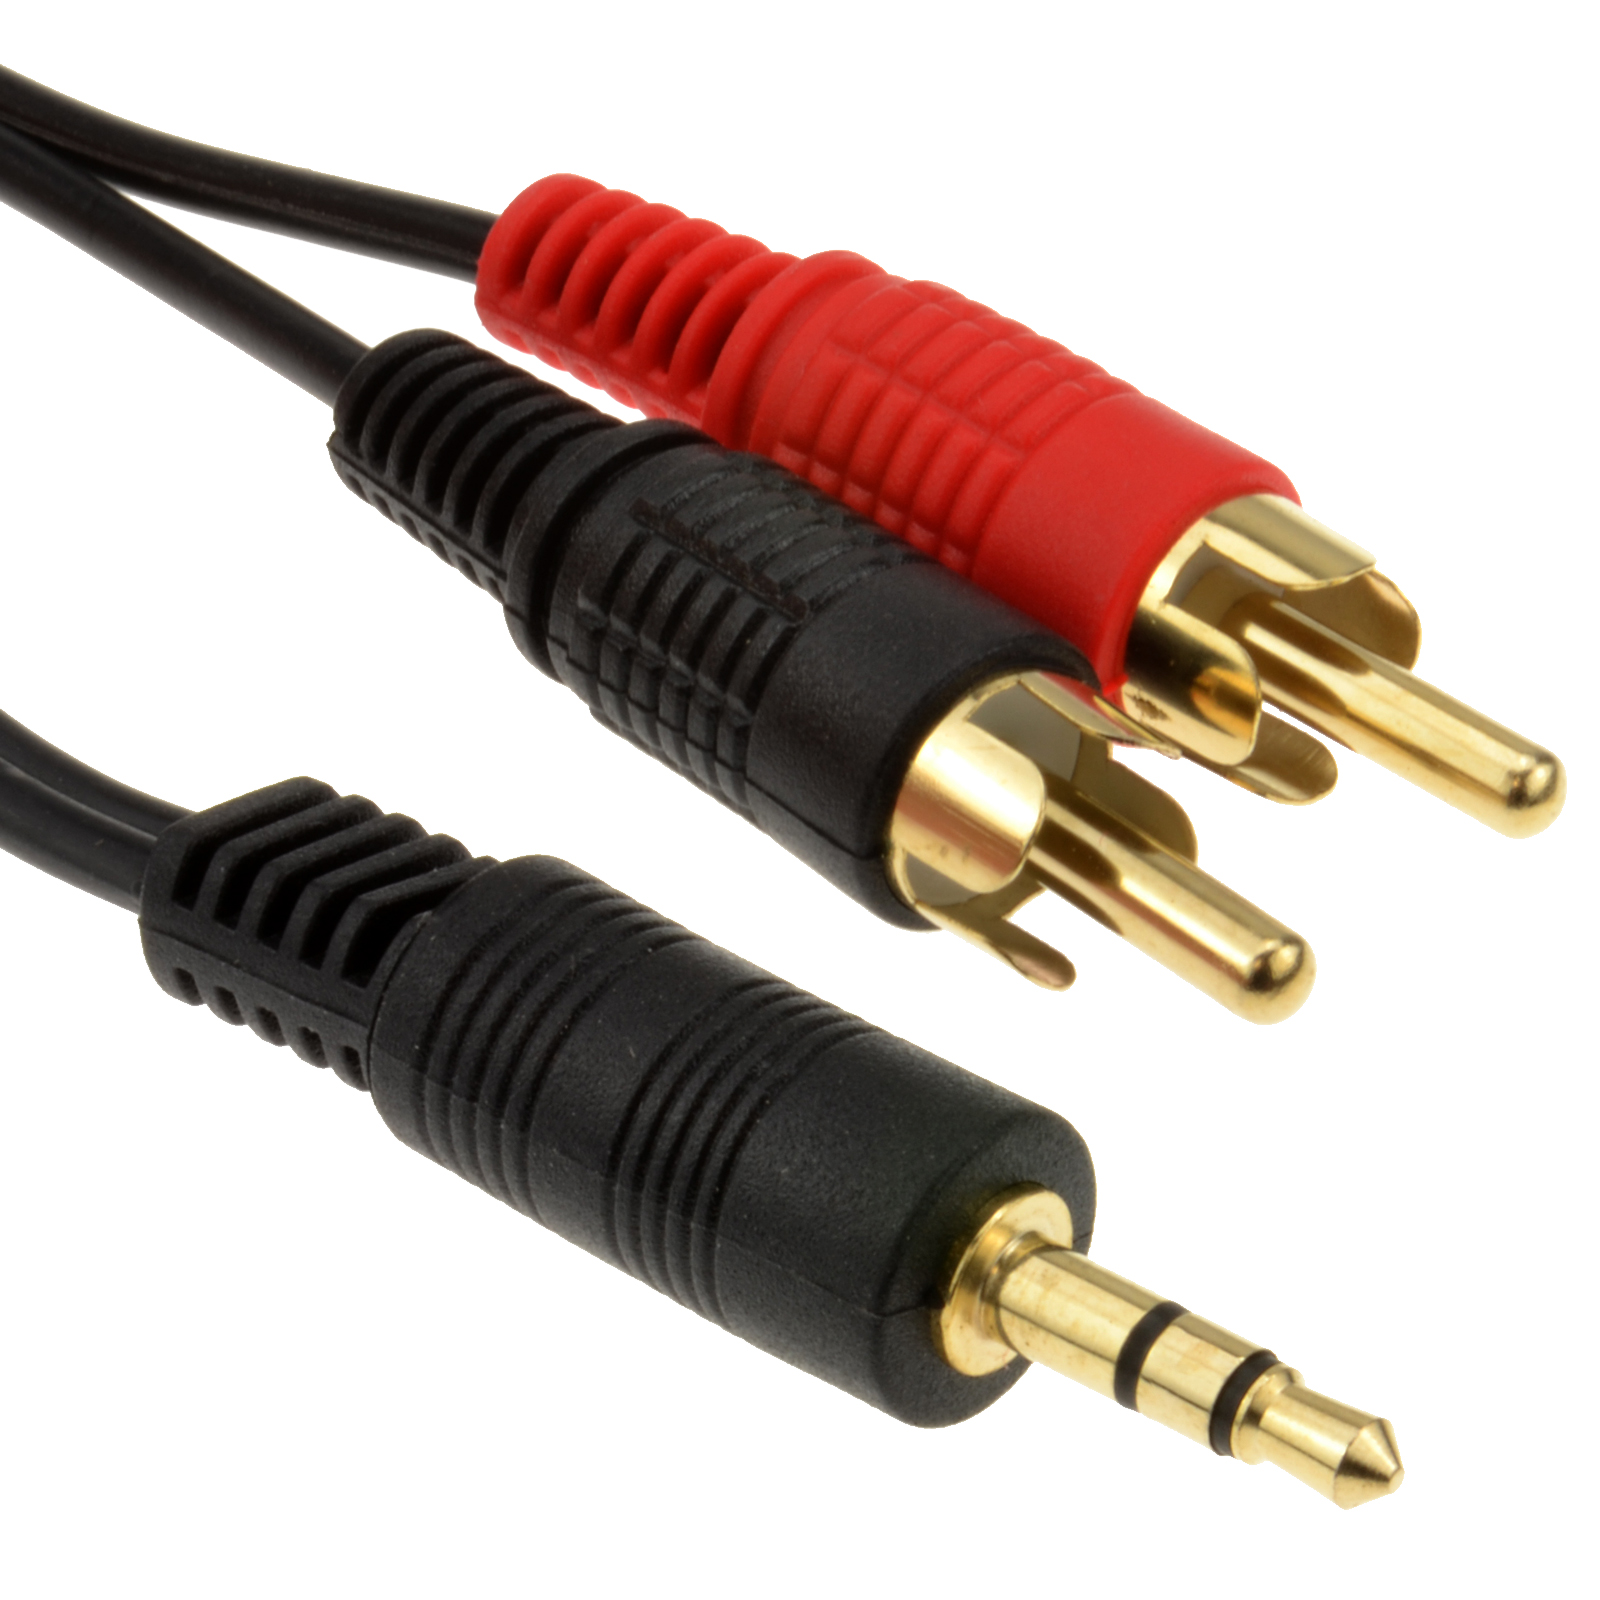 3.5mm Stereo Jack to 2 RCA Phono Plugs Audio Cable Lead GOLD 5m ...